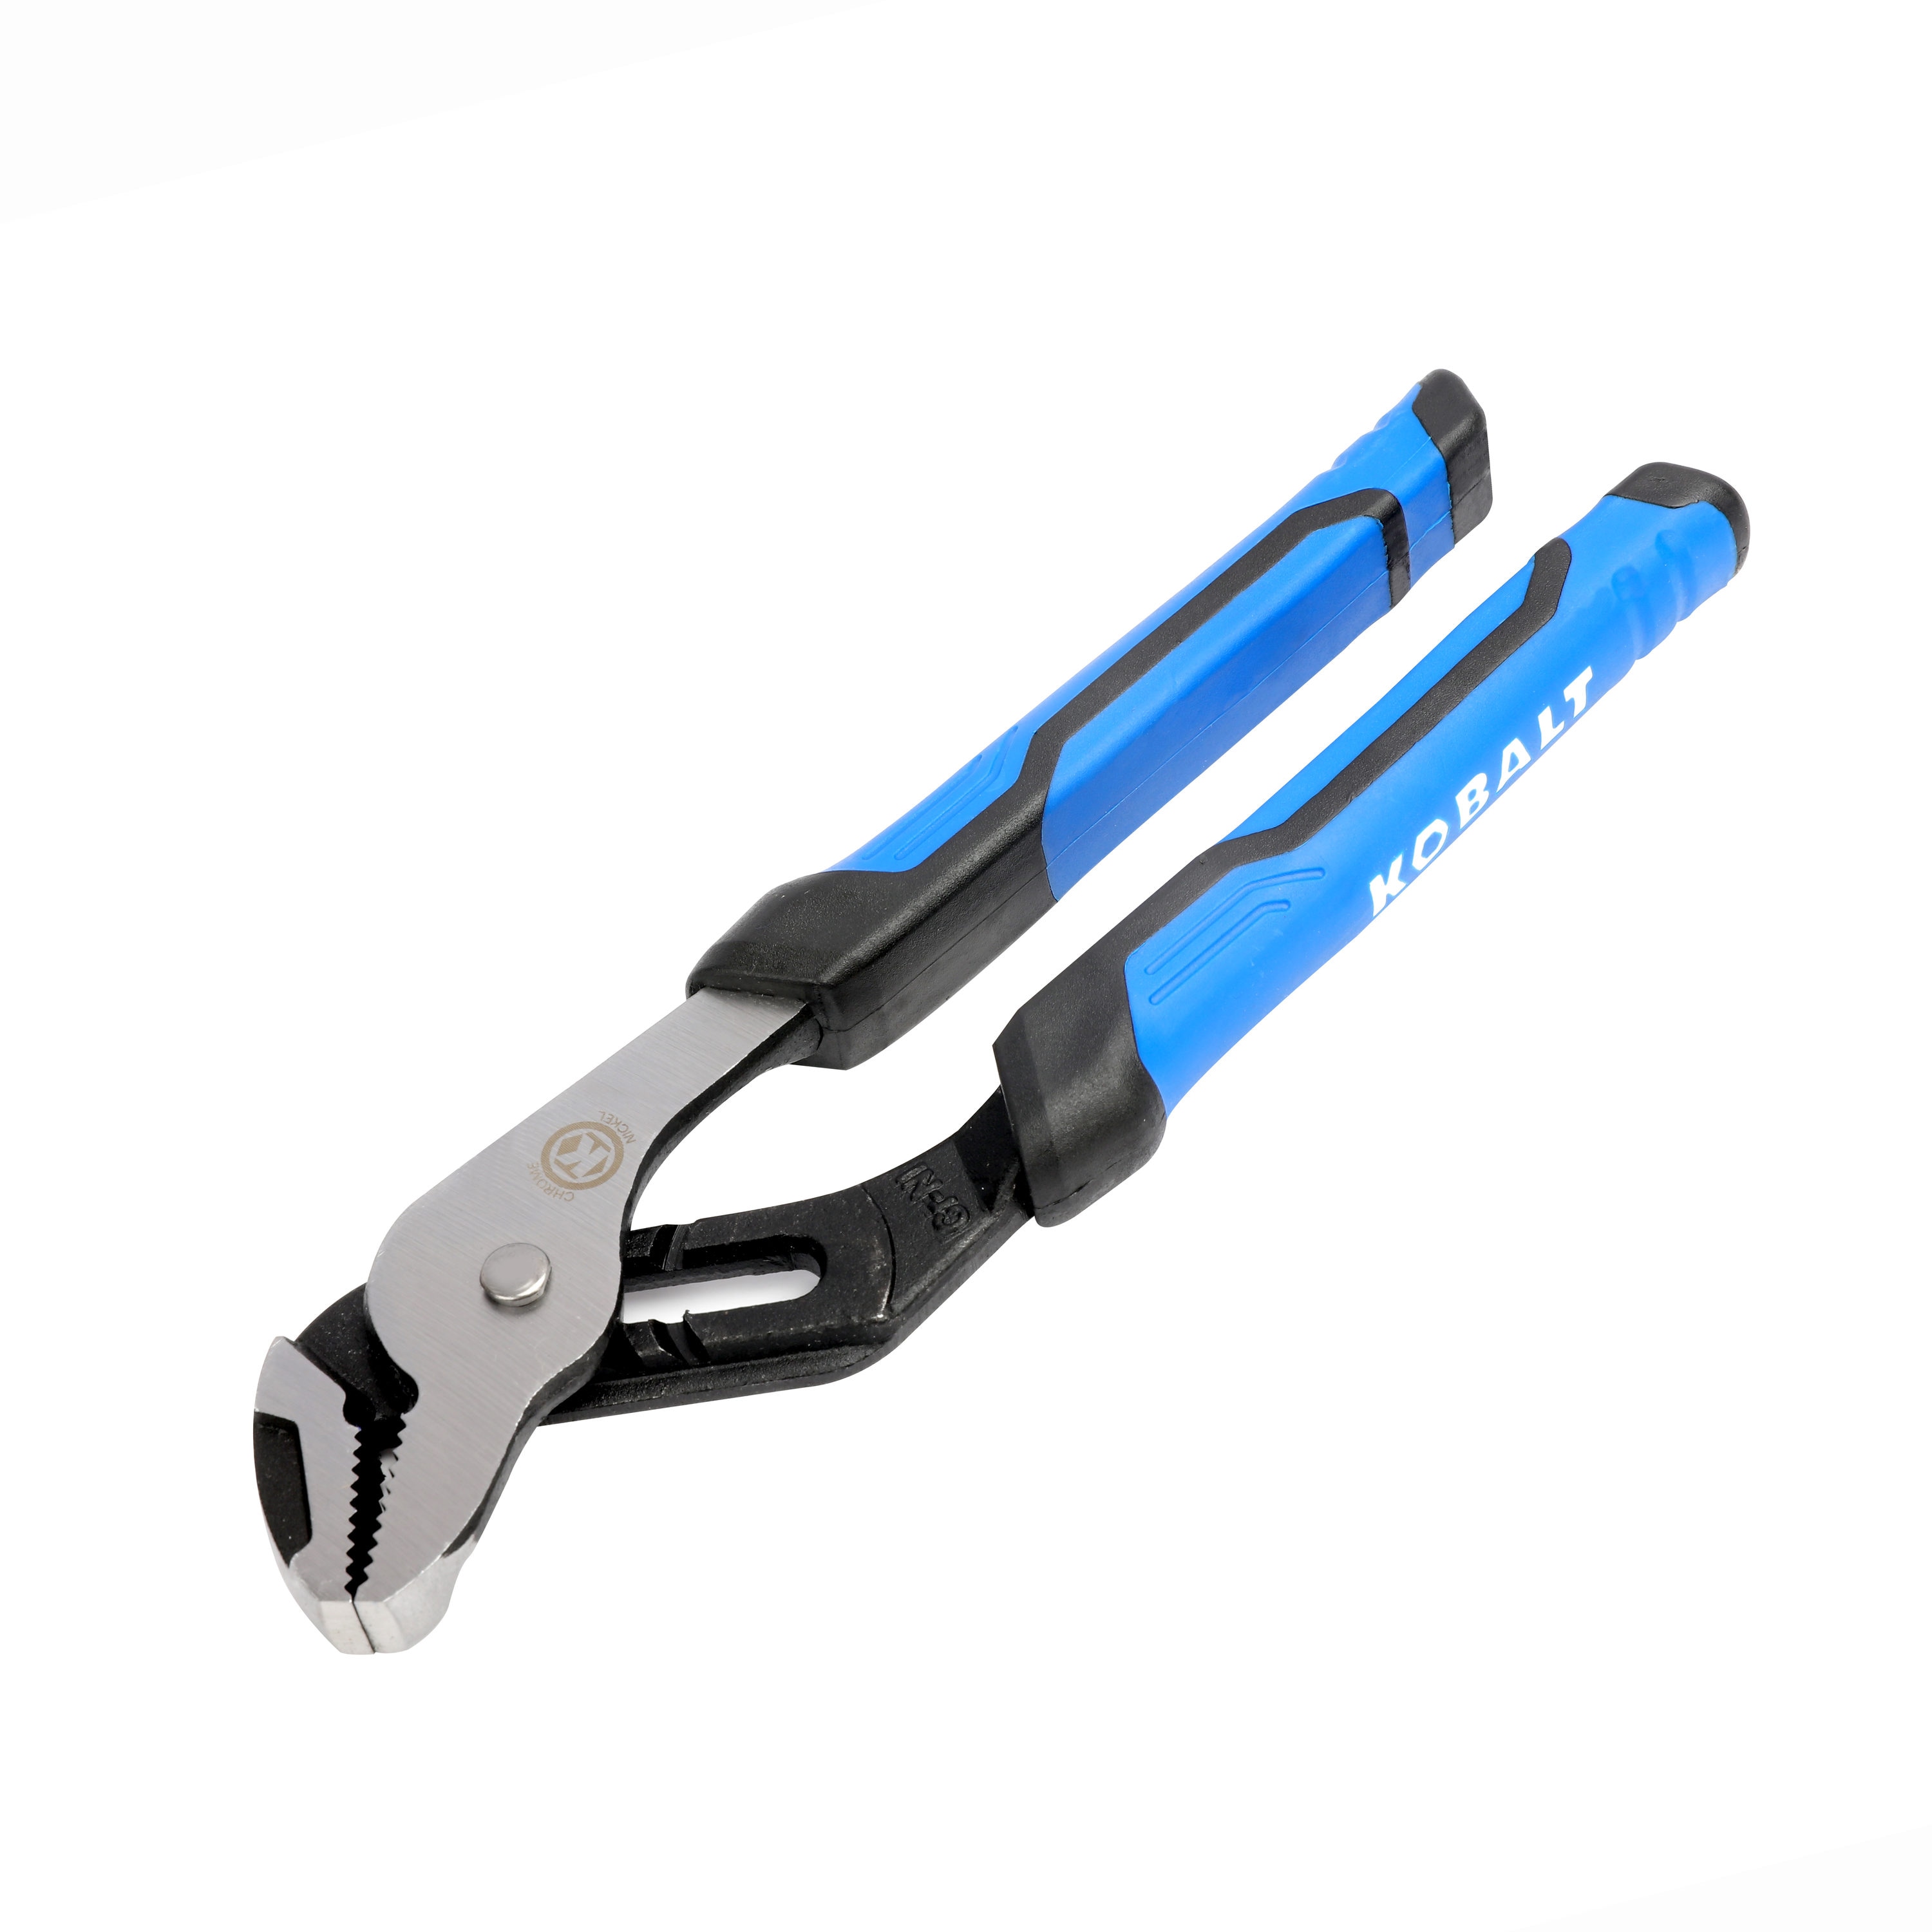 Kobalt 3-Pack Tongue and Groove Plier Set in the Plier Sets department at